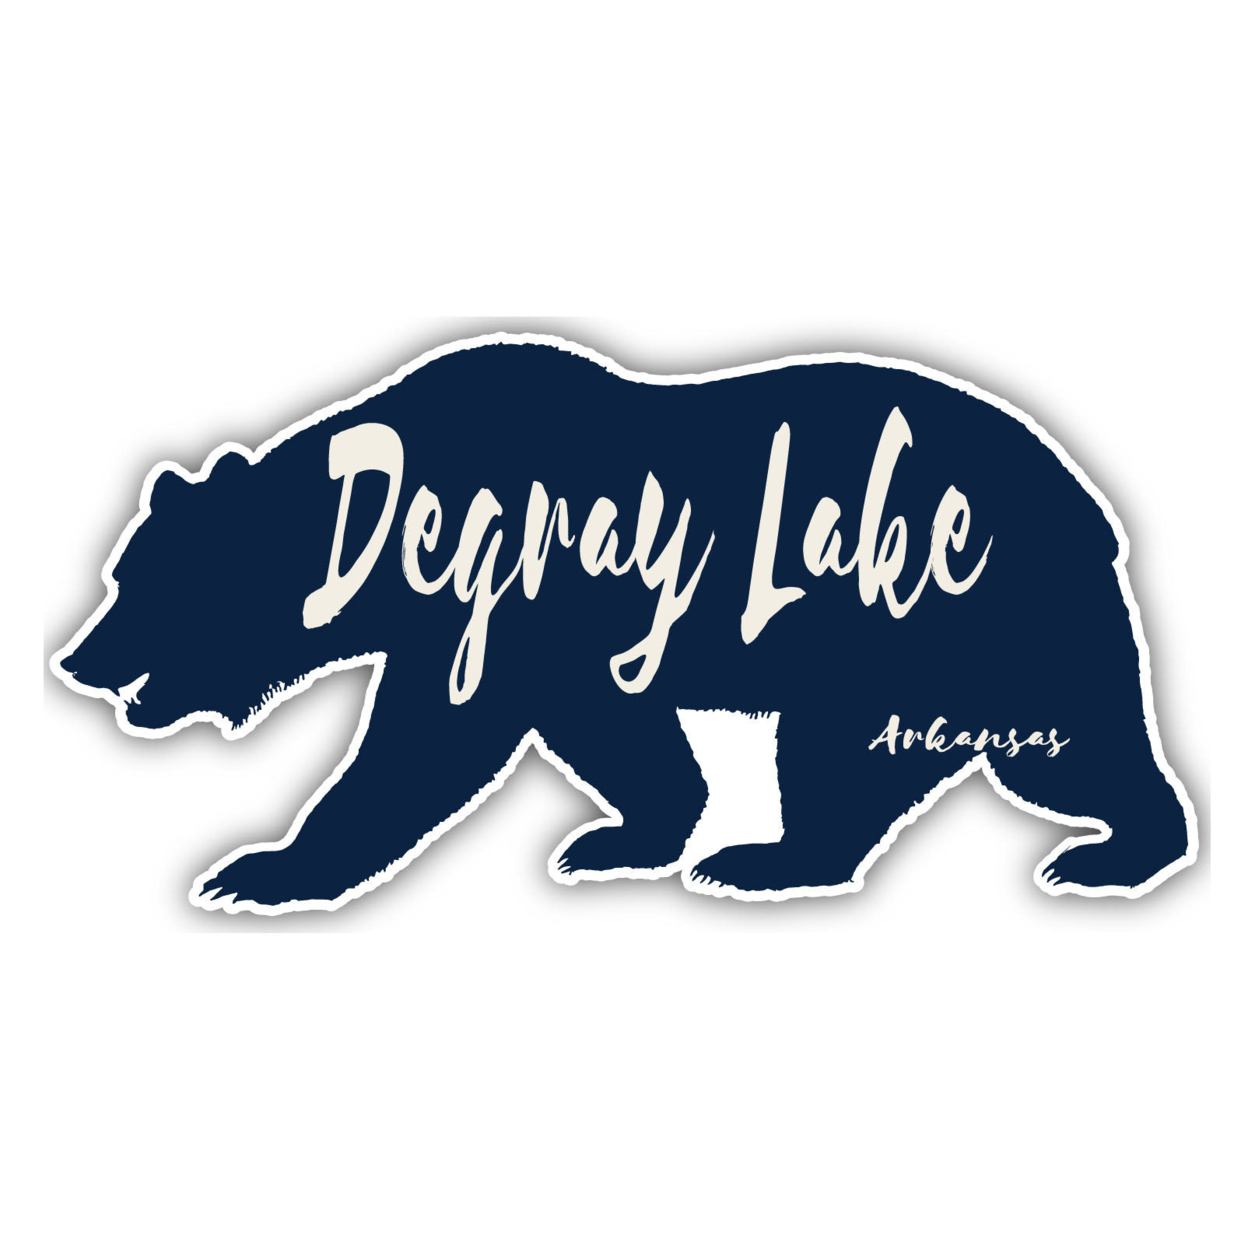 DeGray Lake Arkansas Souvenir Decorative Stickers (Choose Theme And Size) - 4-Pack, 12-Inch, Camp Life